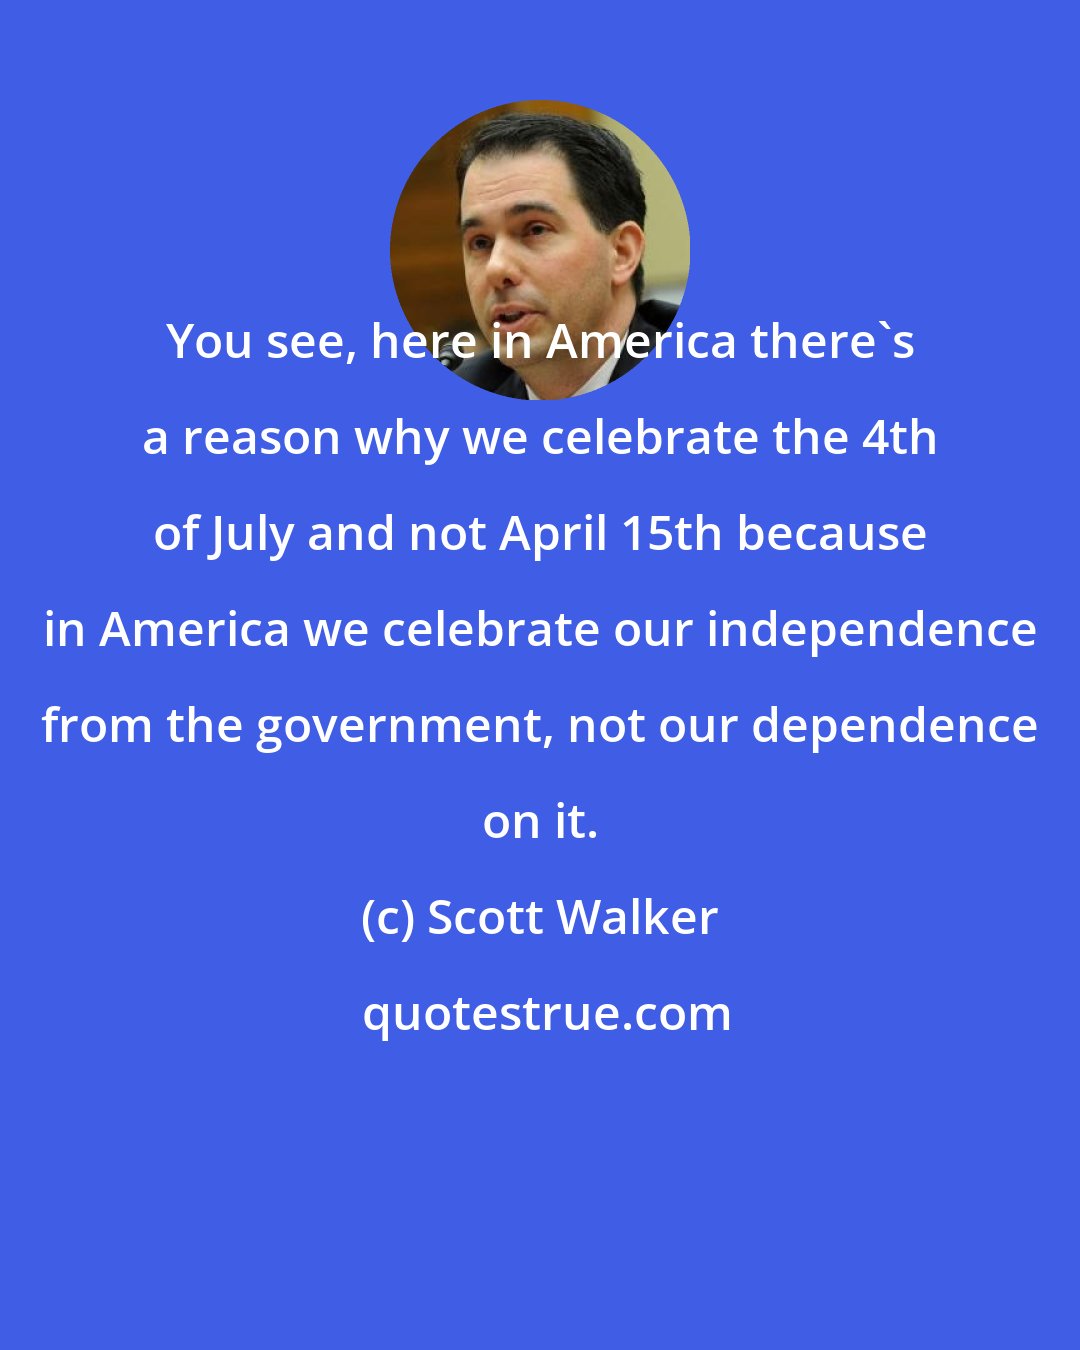 Scott Walker: You see, here in America there's a reason why we celebrate the 4th of July and not April 15th because in America we celebrate our independence from the government, not our dependence on it.